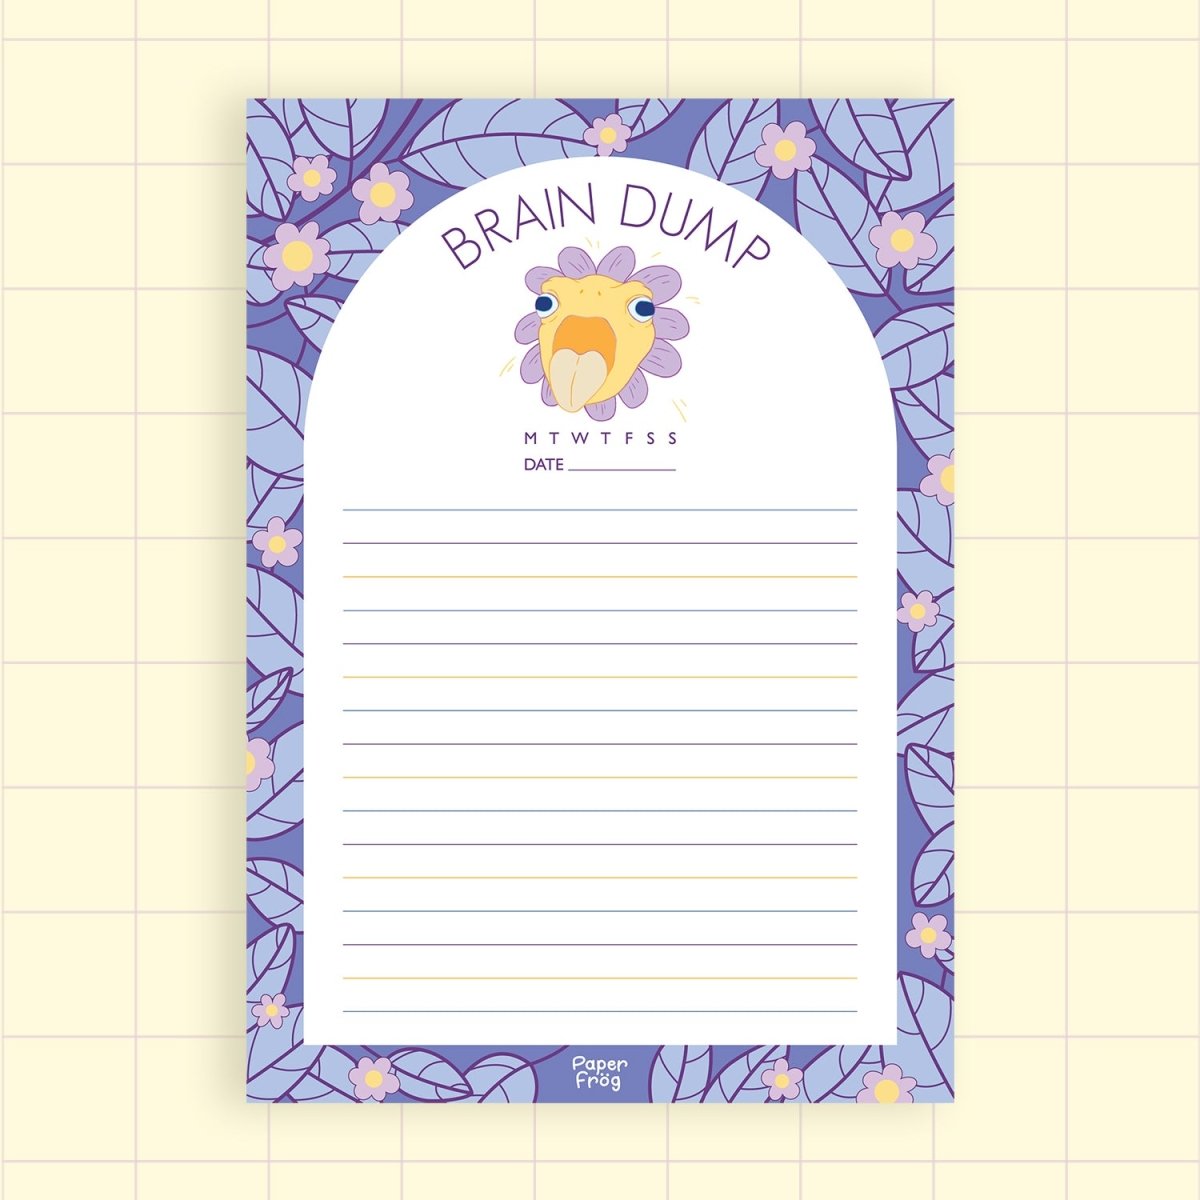 A5 Notepad Brain Dump, best notepad, desk notepad, productivity notepad, frog art, colourful stationery, quality stationery